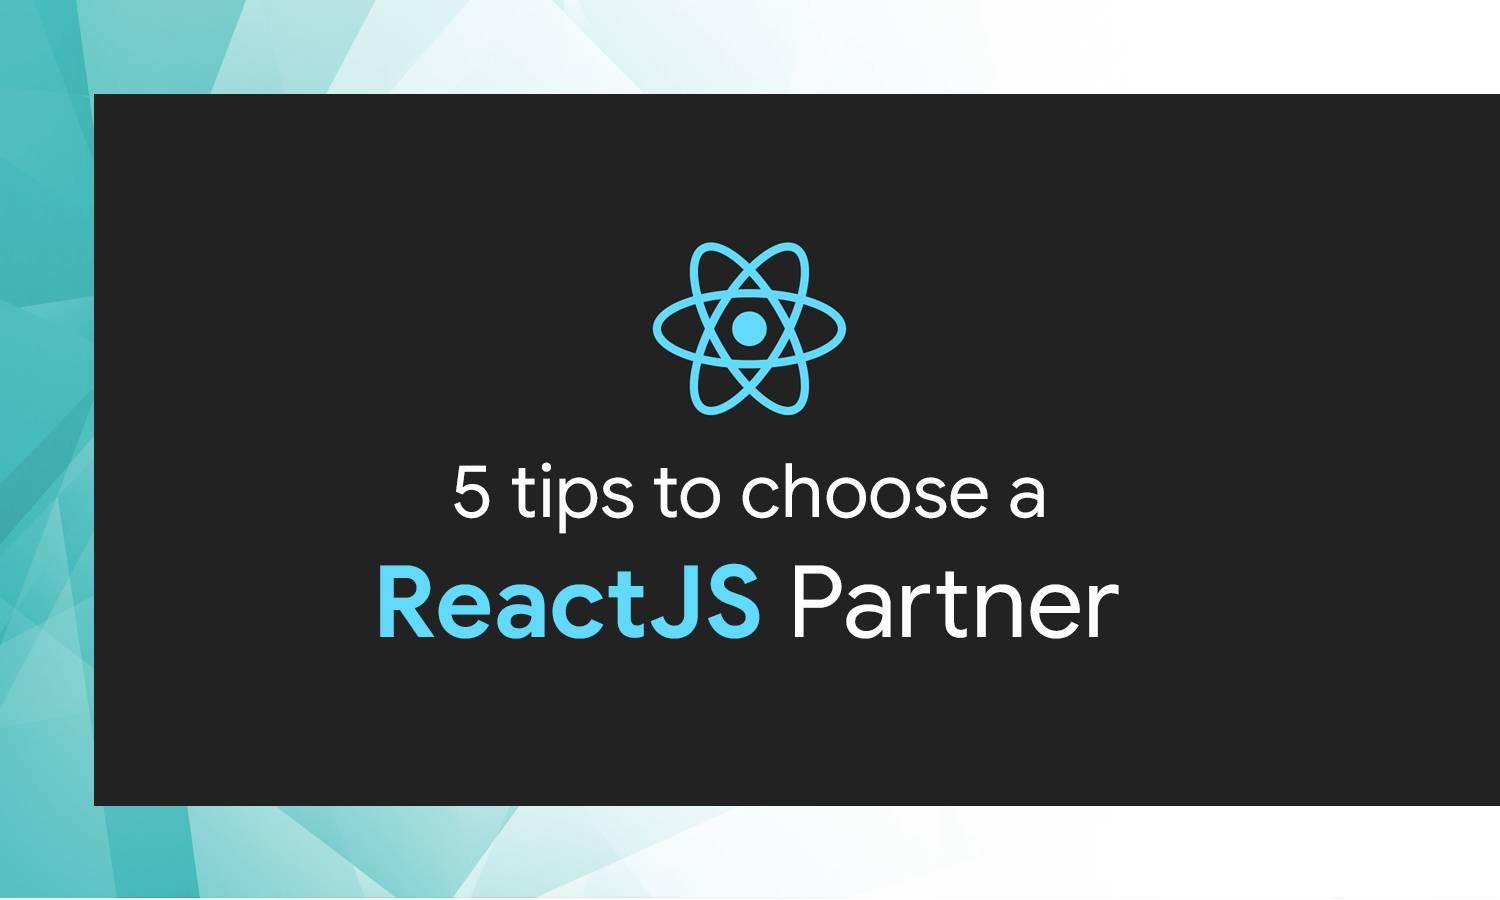 Now you can choose a Reactjs partner by following these 5 tips